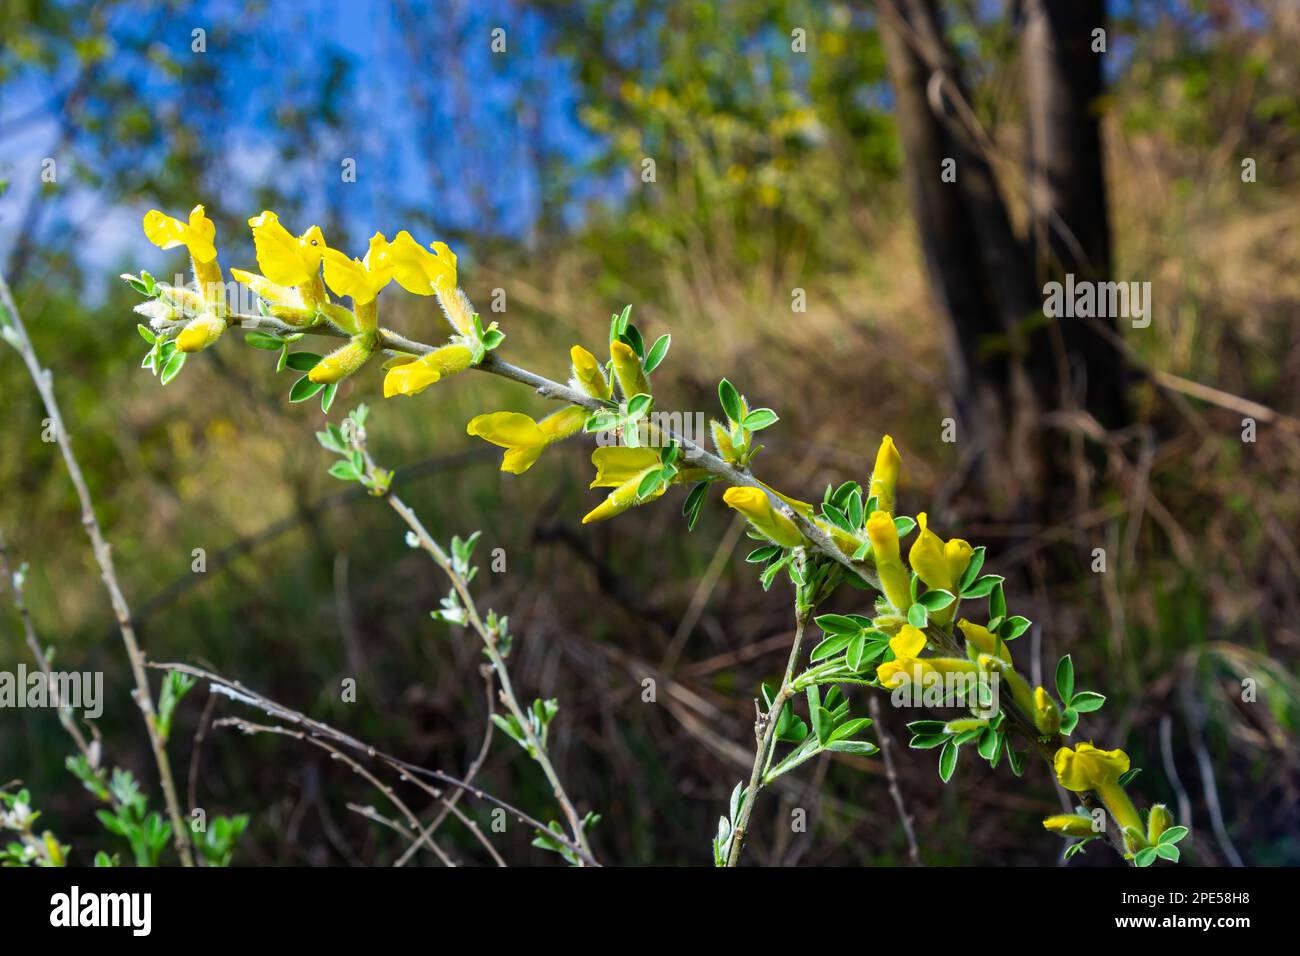 Flowering branch, Chamaecytisus ruthenicus, on natural background. Russian Broom, Chamaecytisus ruthenicus, in garden. Selective focus of flowering pl Stock Photo